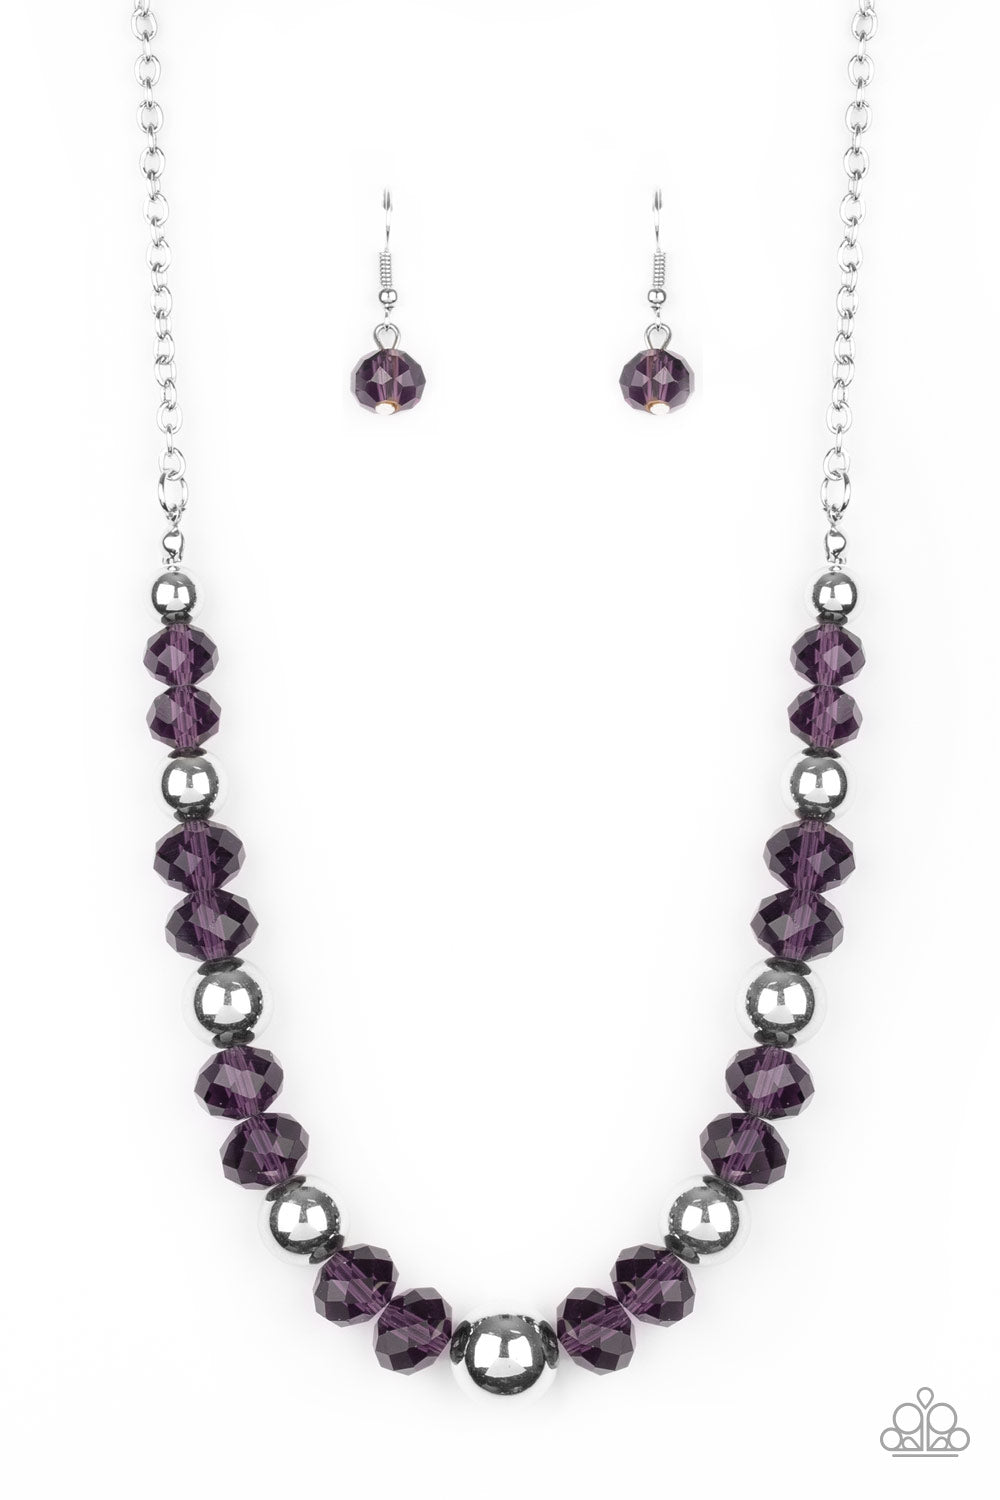 Jewel Jam Purple Necklace - Paparazzi Accessories  A glittery collection of purple crystal-like beads and shiny silver beads are threaded along an invisible wire below the collar for a refined flair. Features an adjustable clasp closure.  Sold as one individual necklace. Includes one pair of matching earrings.